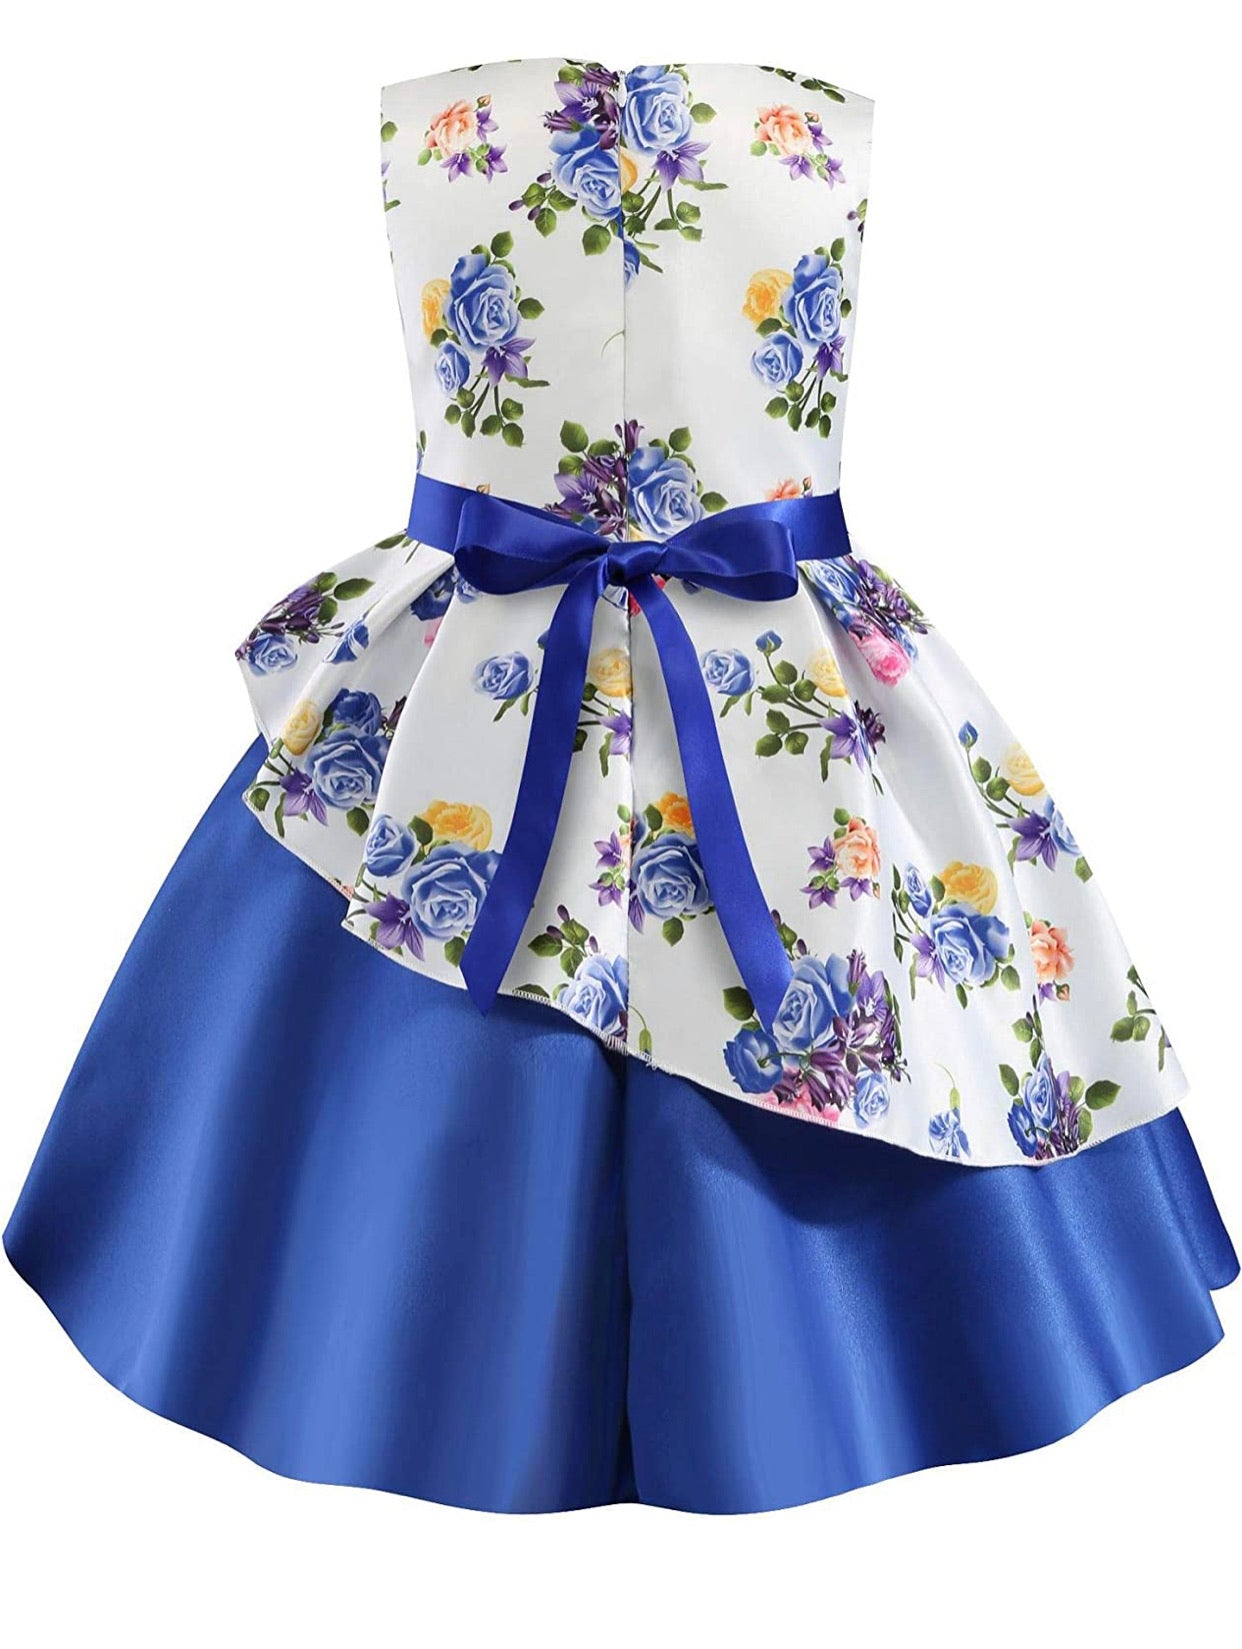 Girls Dresses Sequins Formal Evening Wedding Ball Gown Princess Girls Dress  Children Clothing Kids Party For Girl Clothes 3 9 Years From Phononame,  $28.63 | DHgate.Com